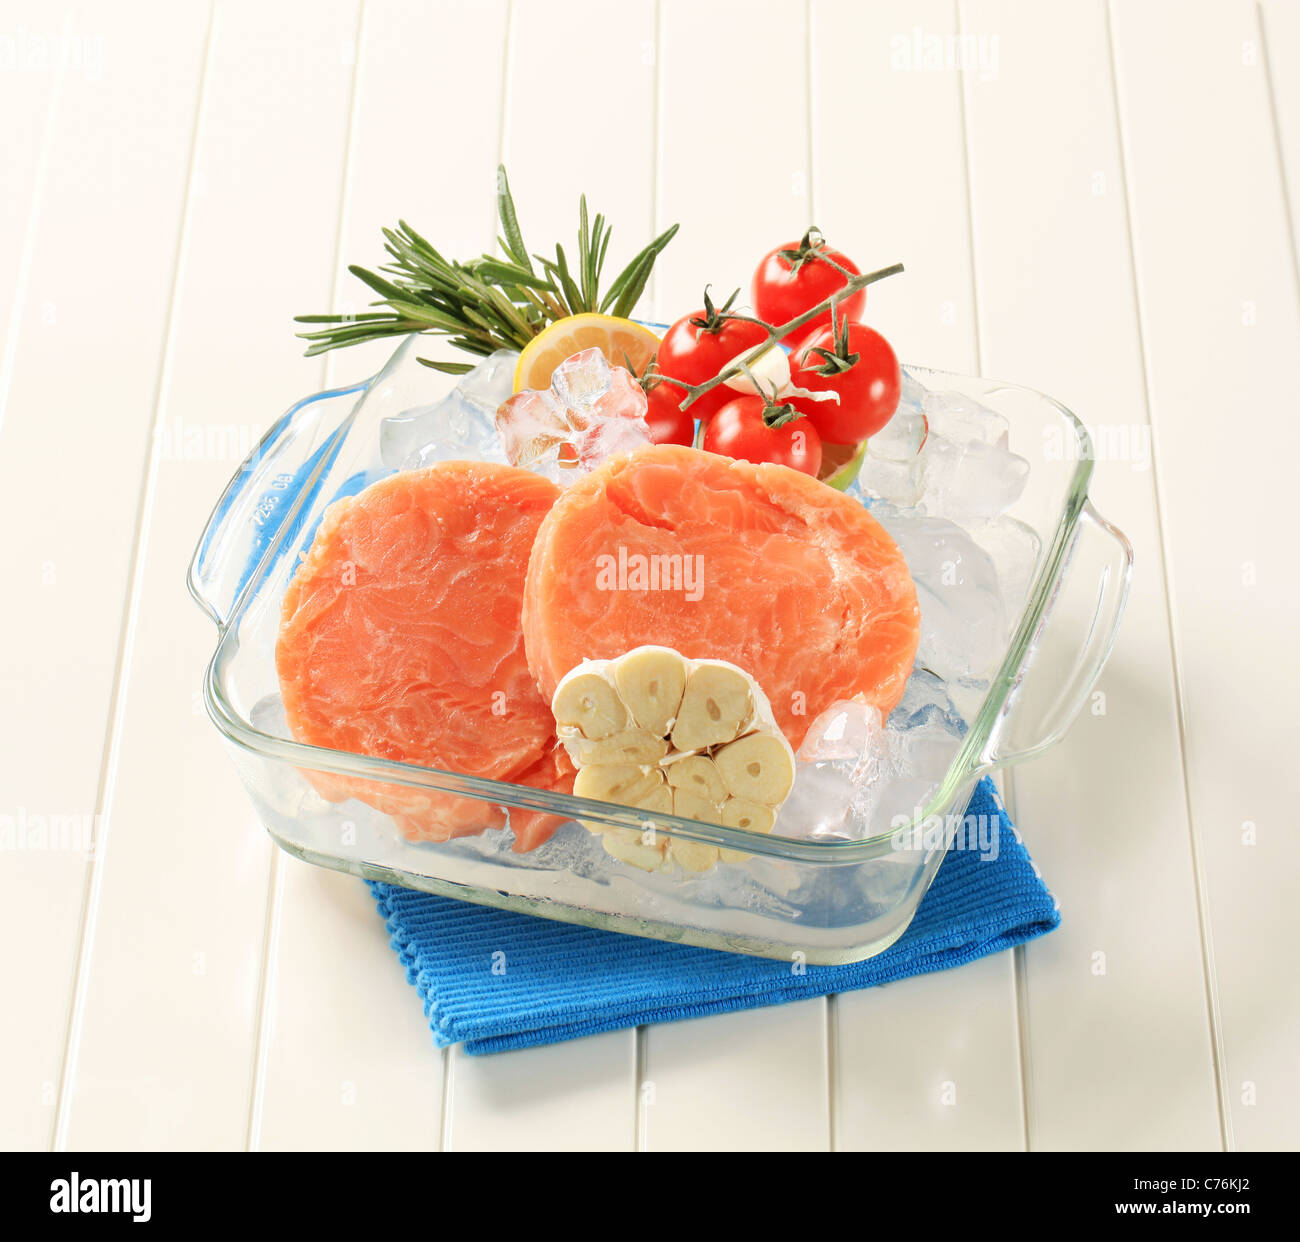 Raw salmon patties and other ingredients on ice Stock Photo